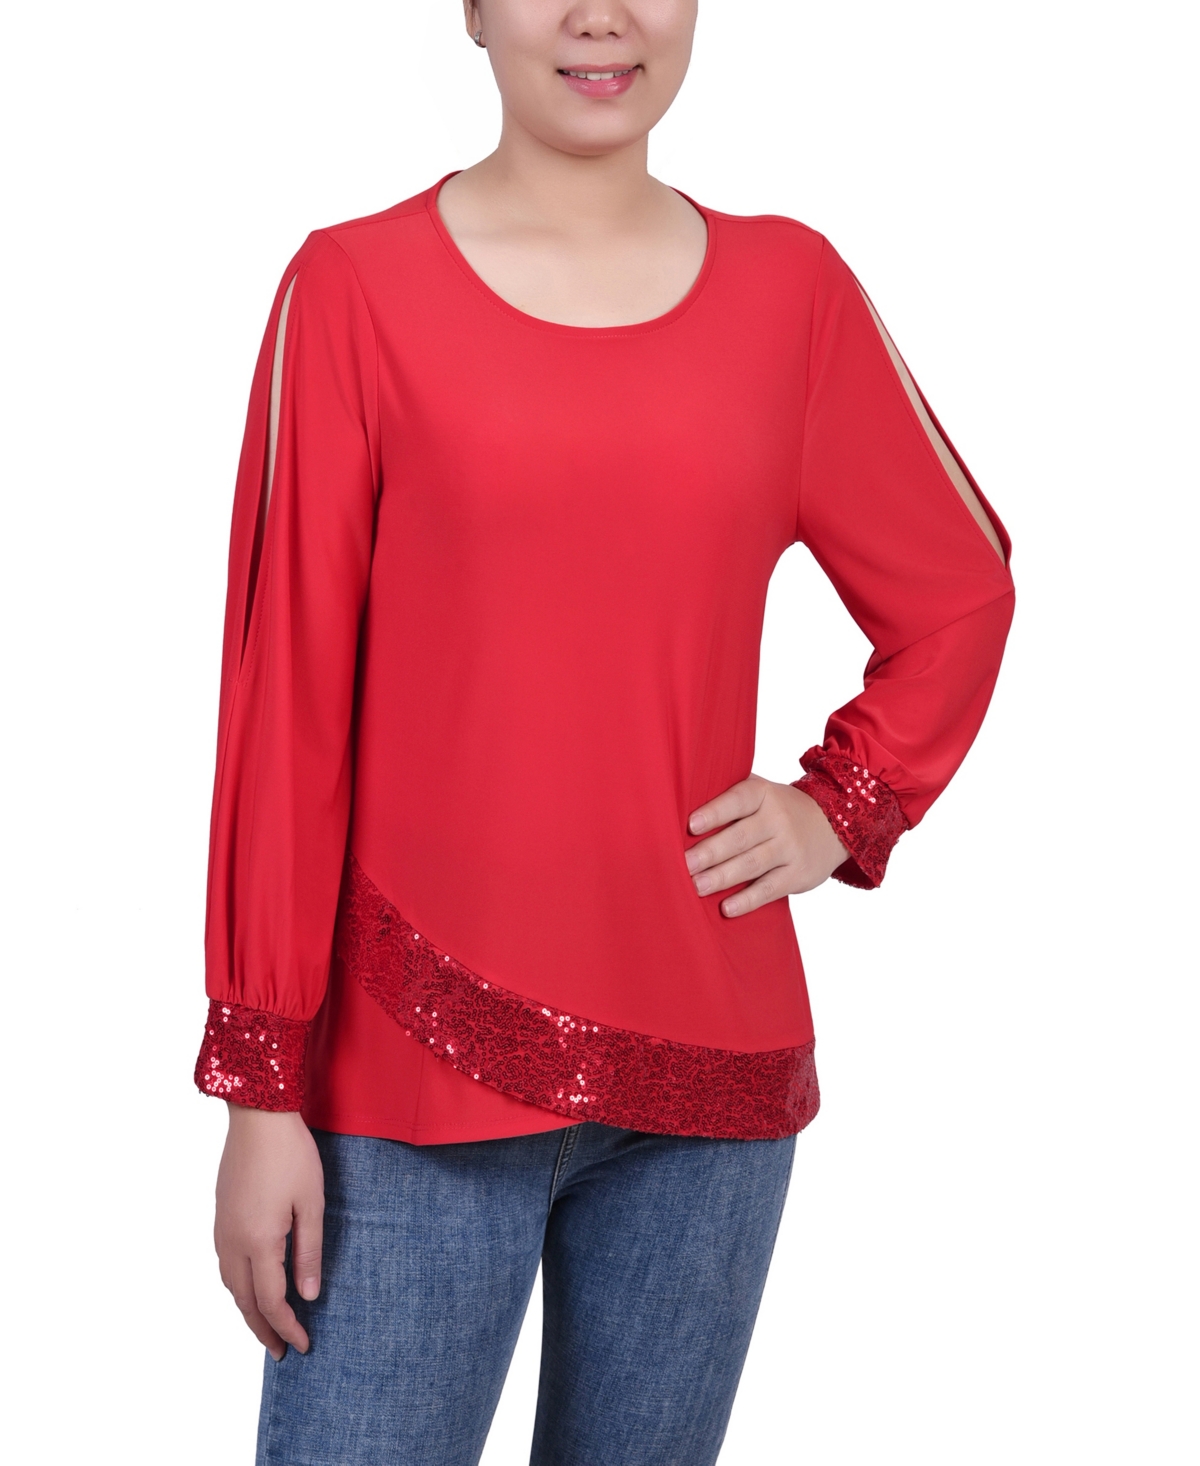 NY COLLECTION WOMEN'S LONG SLEEVE KNIT TOP WITH SEQUIN TRIM